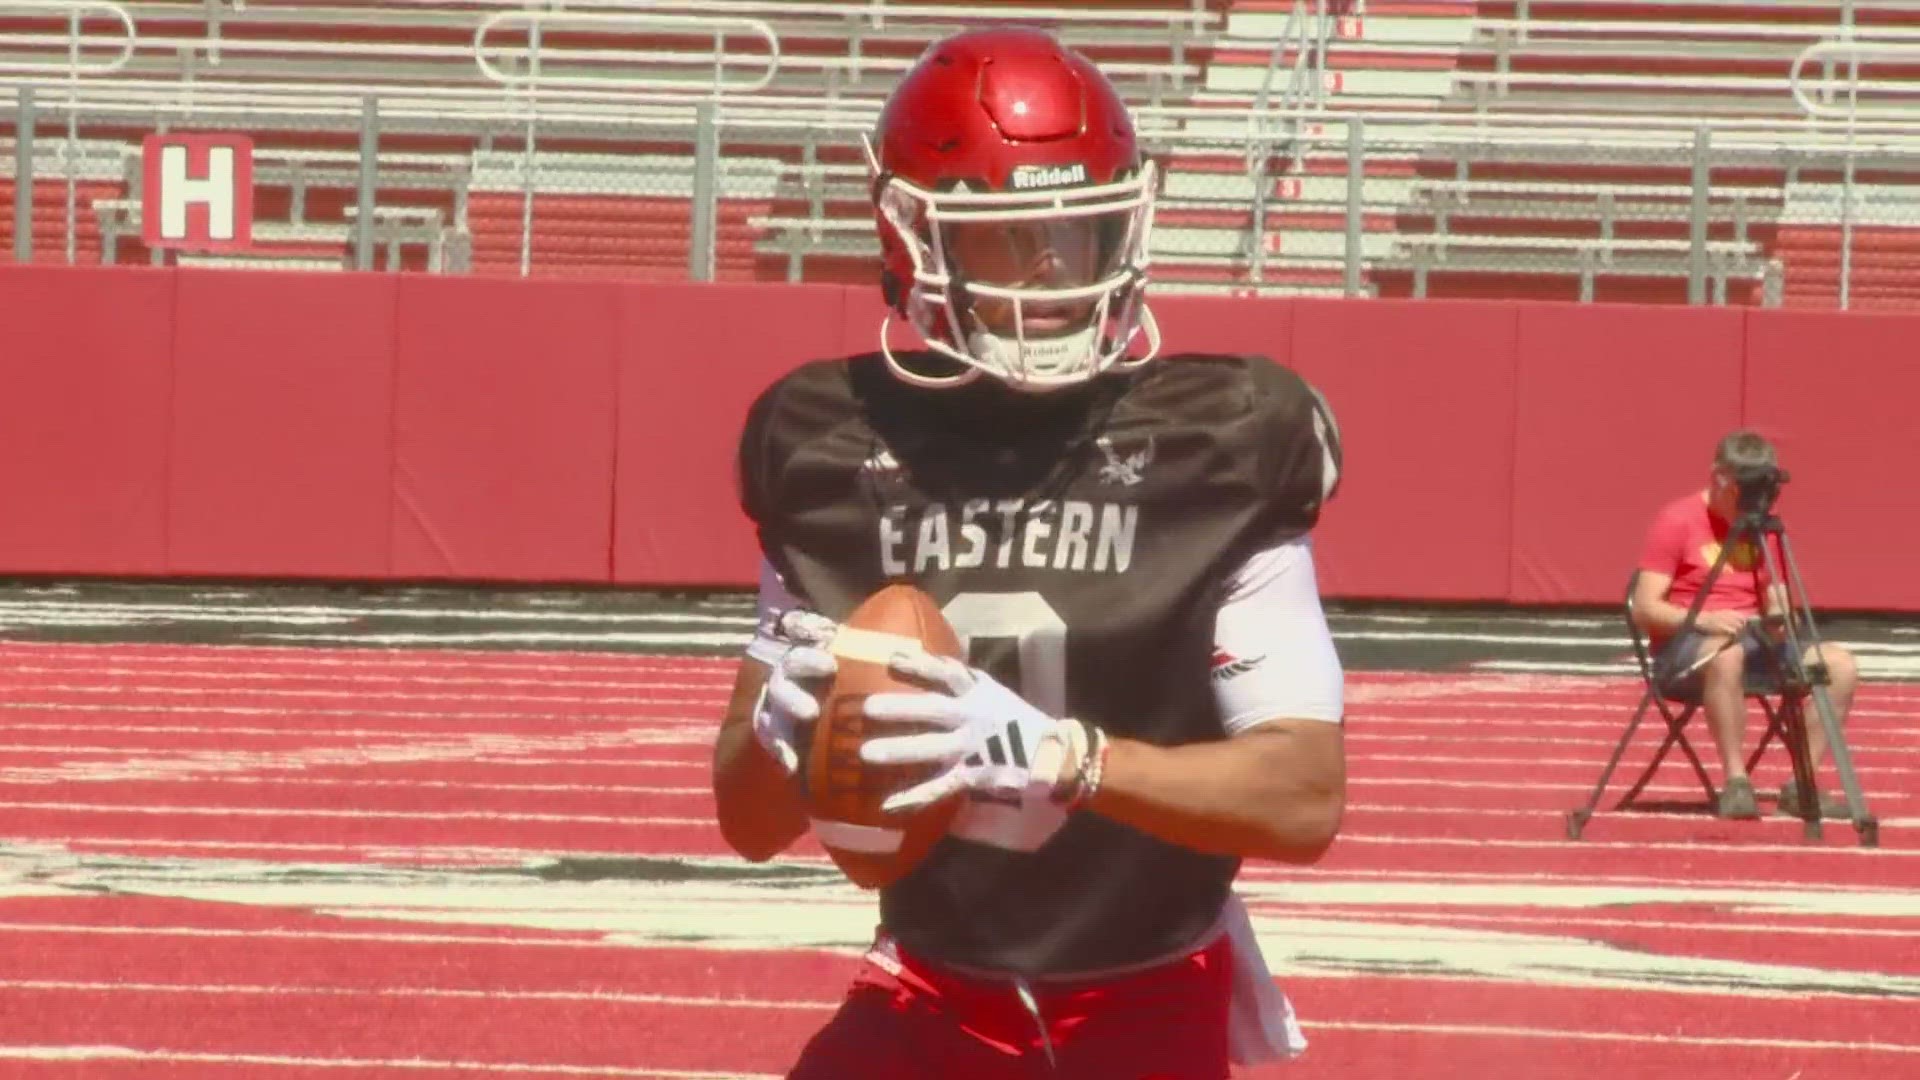 Visperas is heading into this season with new expectations now that he's starting quarterback for EWU.